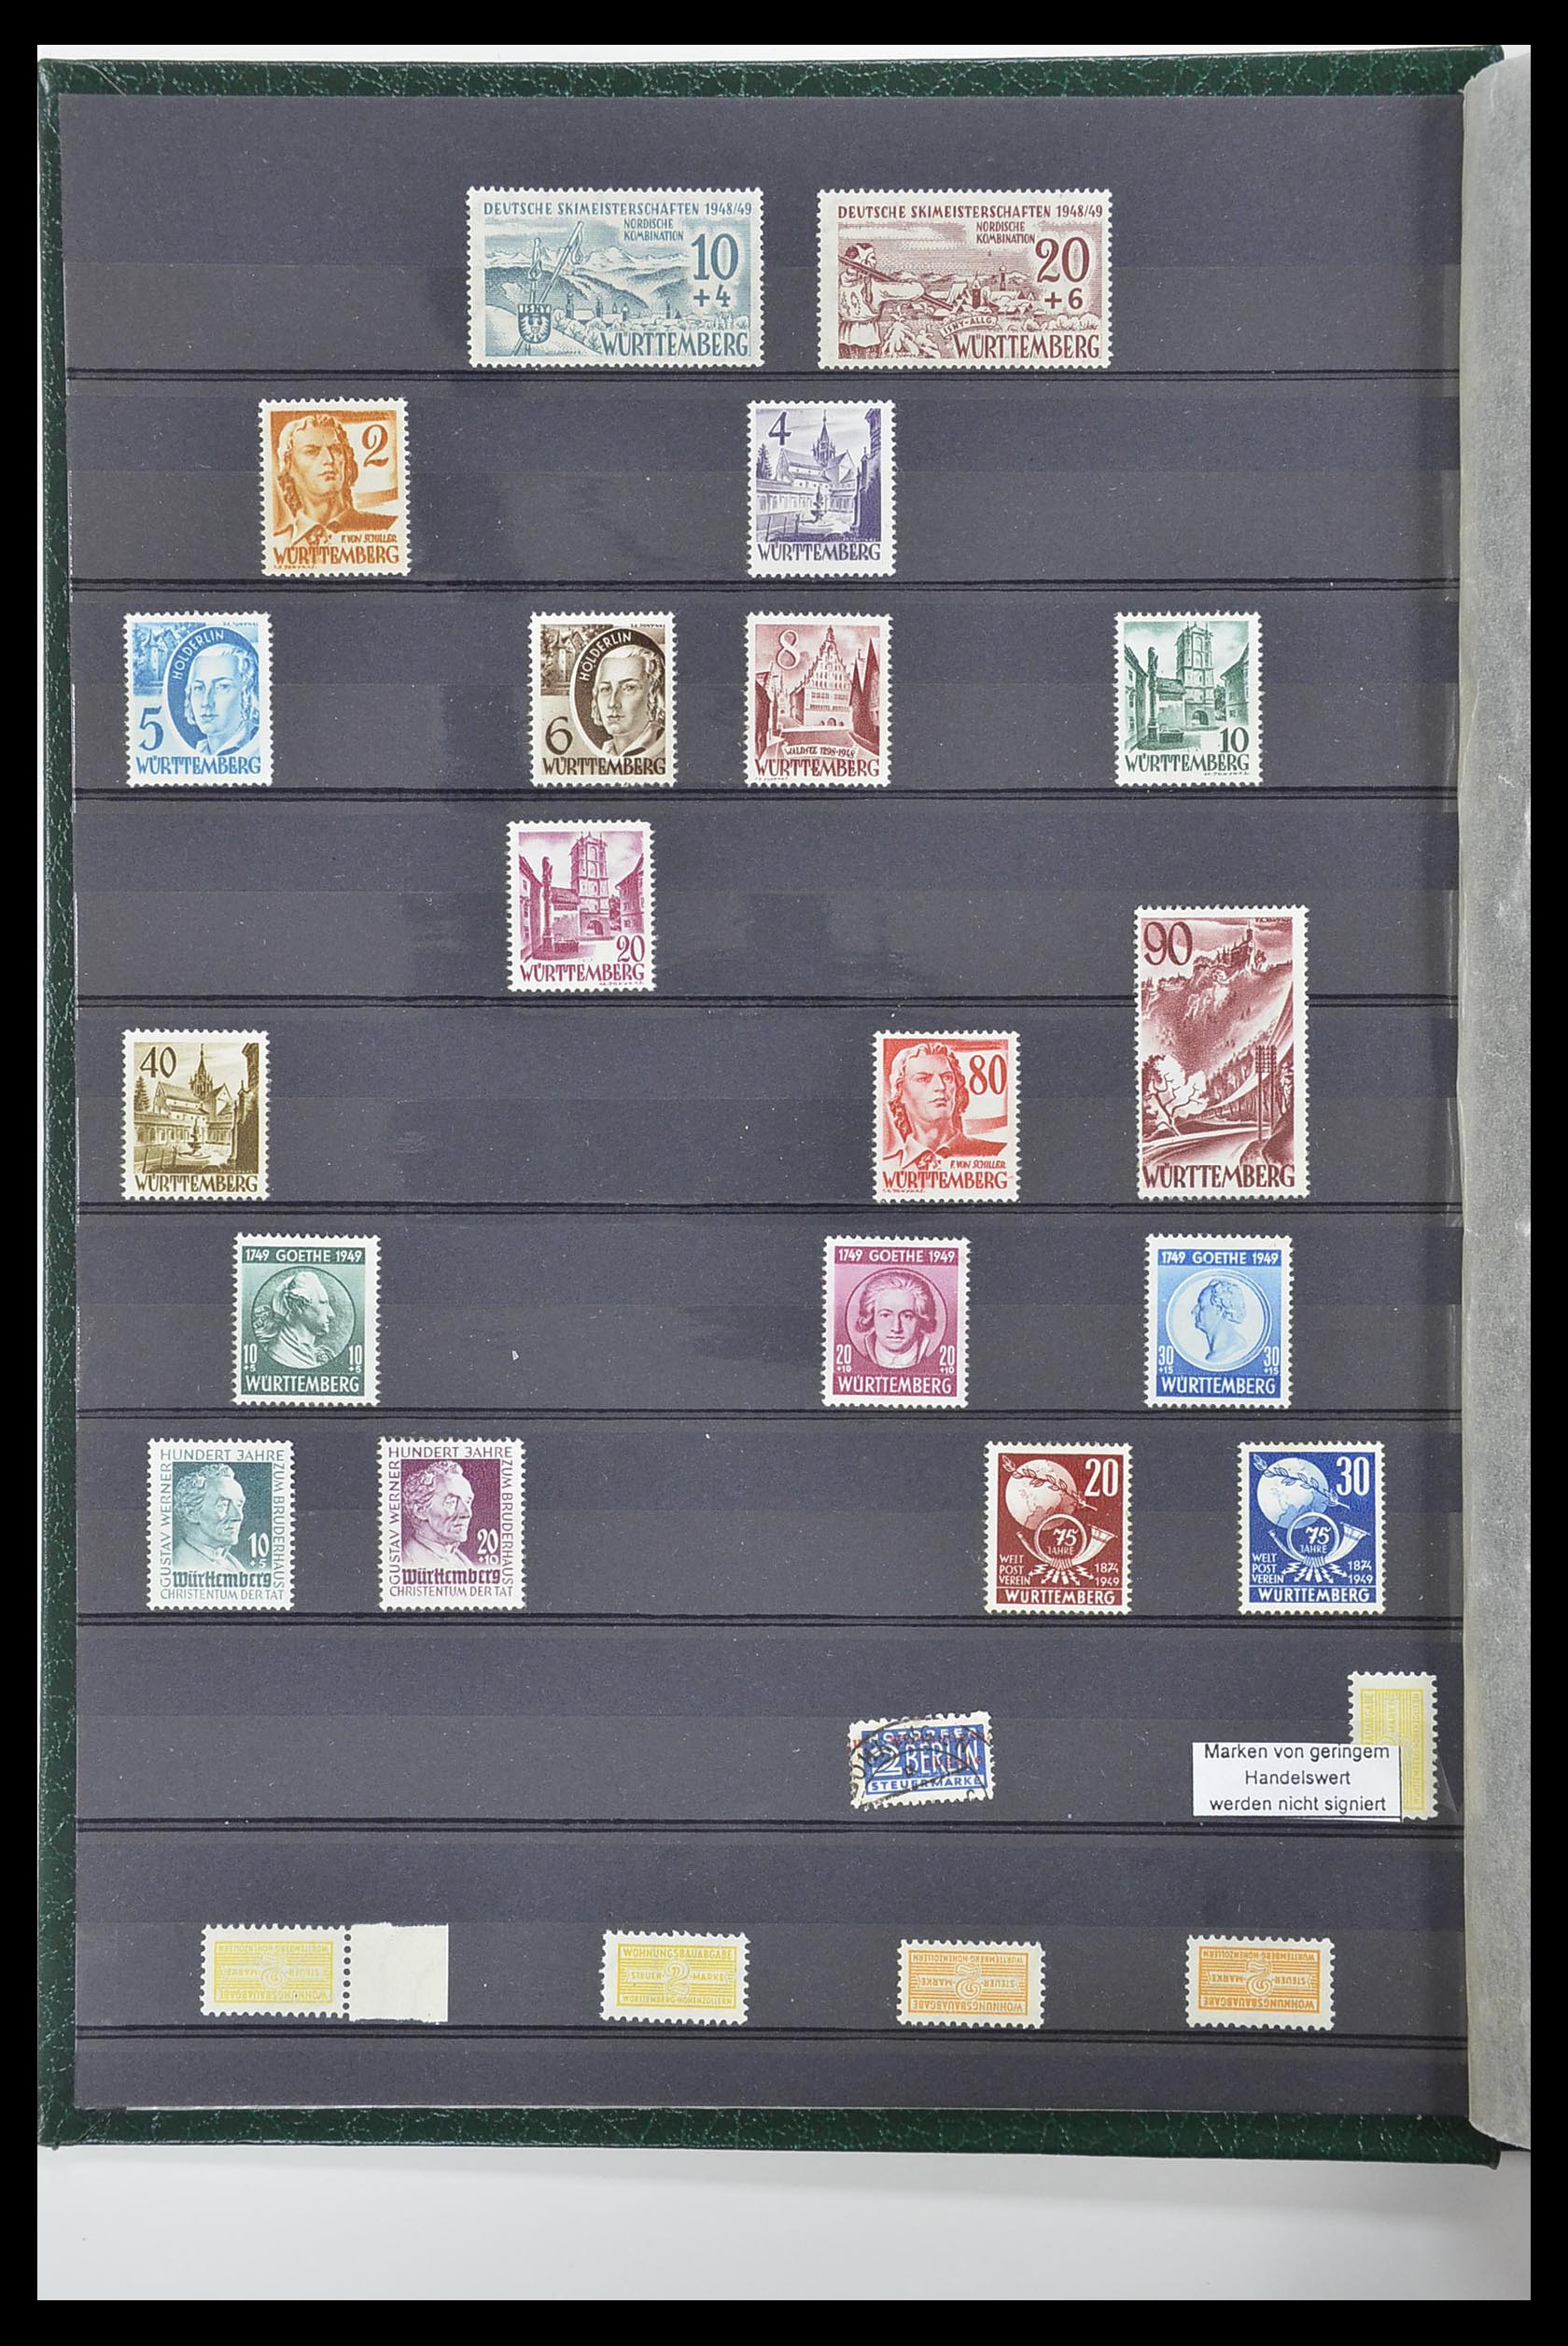 33553 082 - Stamp collection 33553 German territories and occupations 1939-1948.